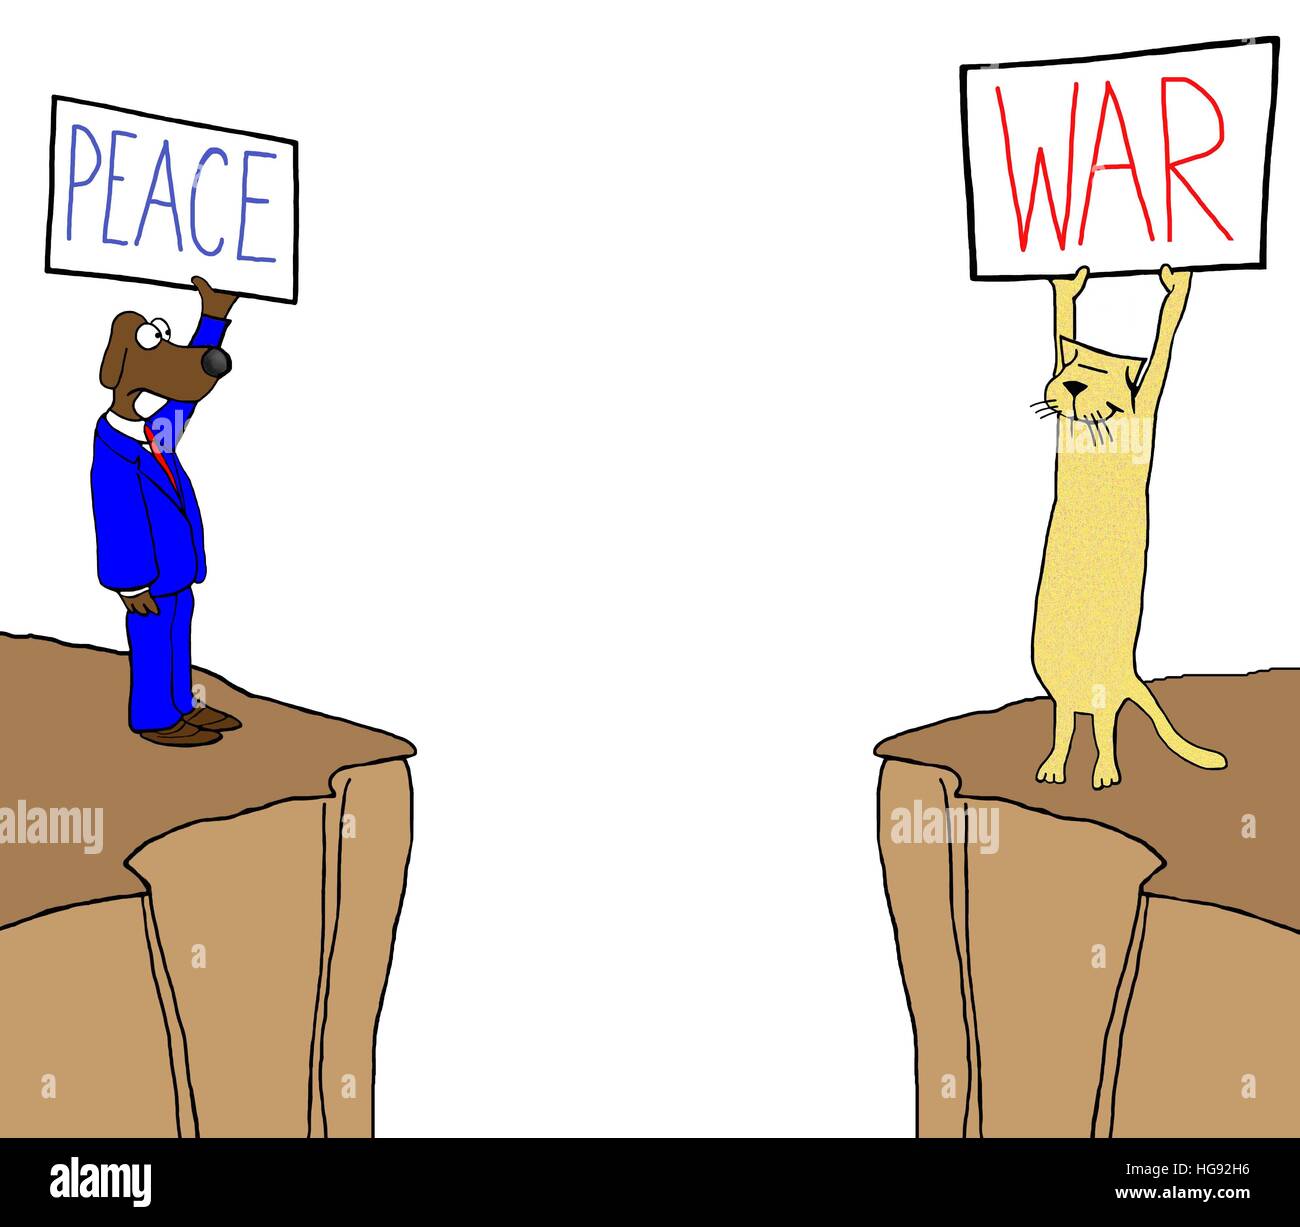 Cartoon about a cat and dog with two different thoughts: 'peace' and 'war'. Stock Photo